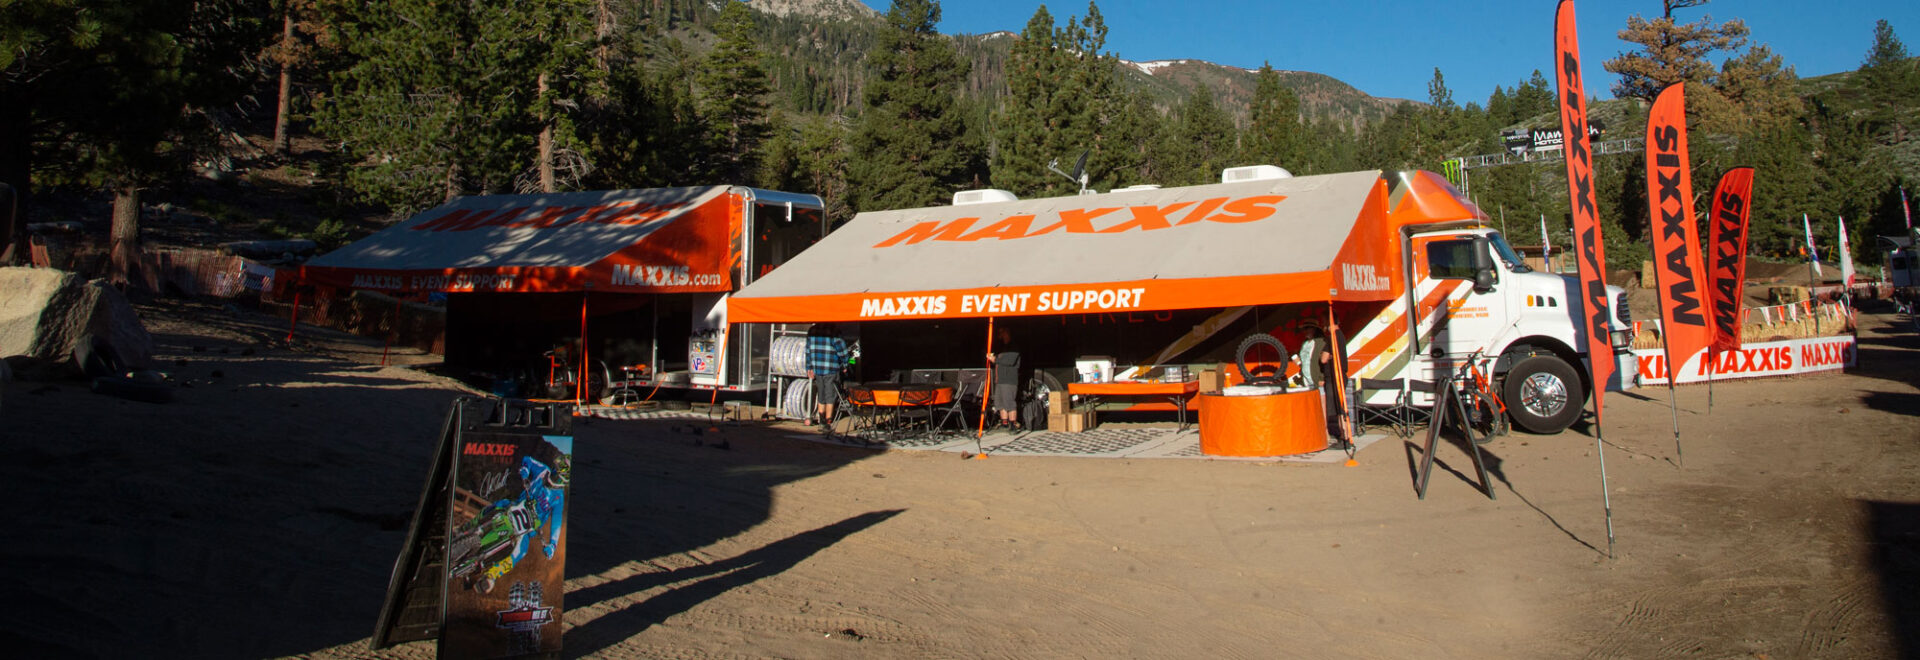 Maxxis tents and banners at WORCS race.